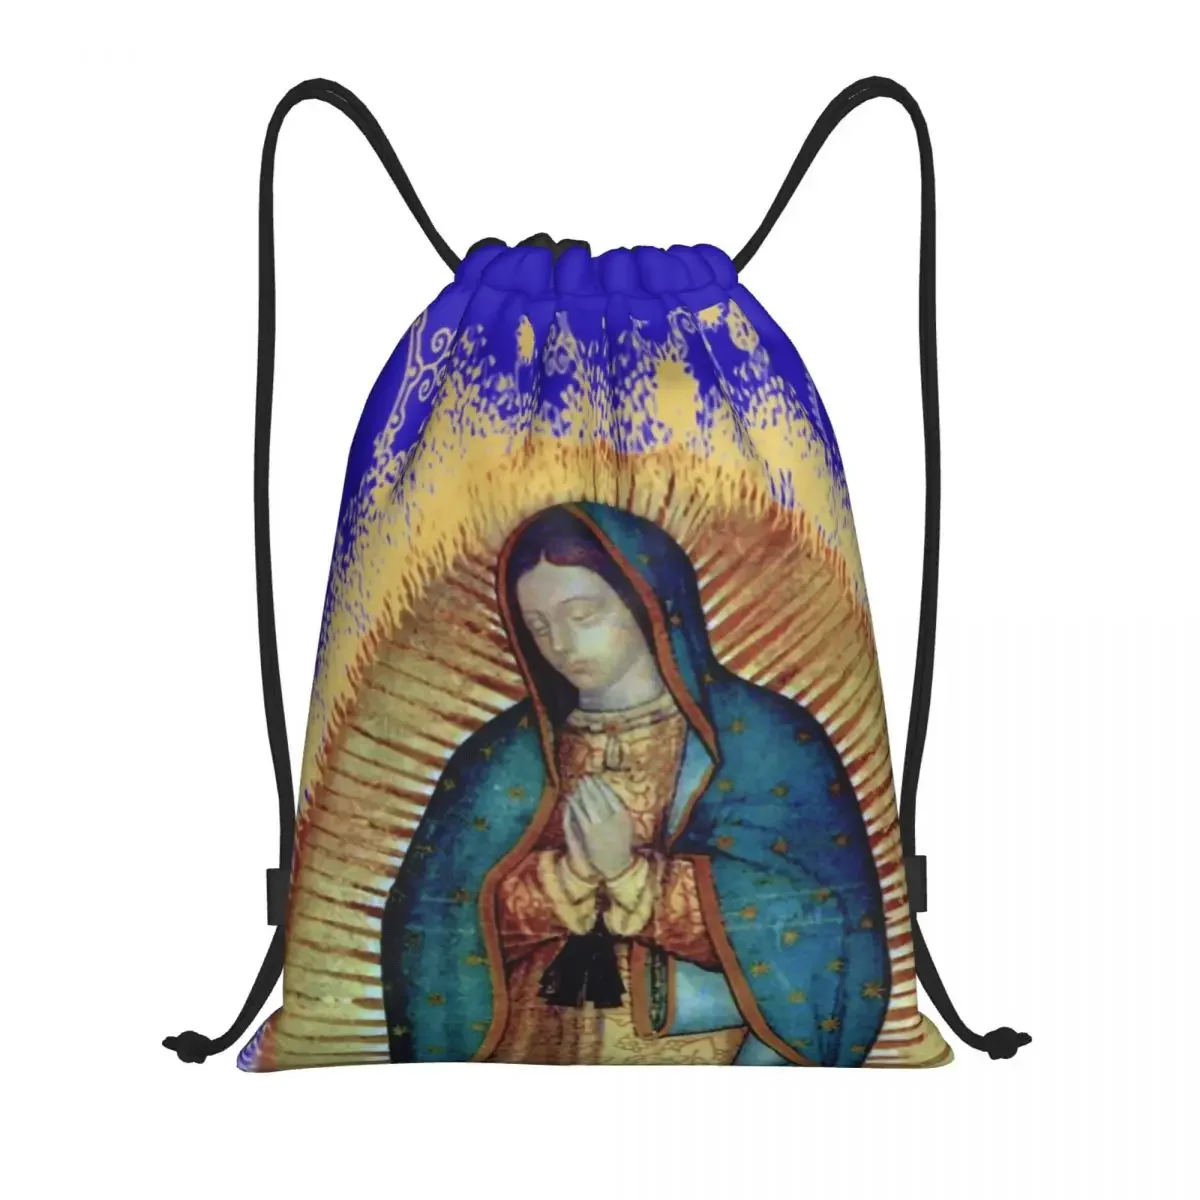 

Custom Our Lady Of Guadalupe Mexican Virgin Mary Mexico Tilma Drawstring Bags Women Men Lightweight Sports Gym Storage Backpack